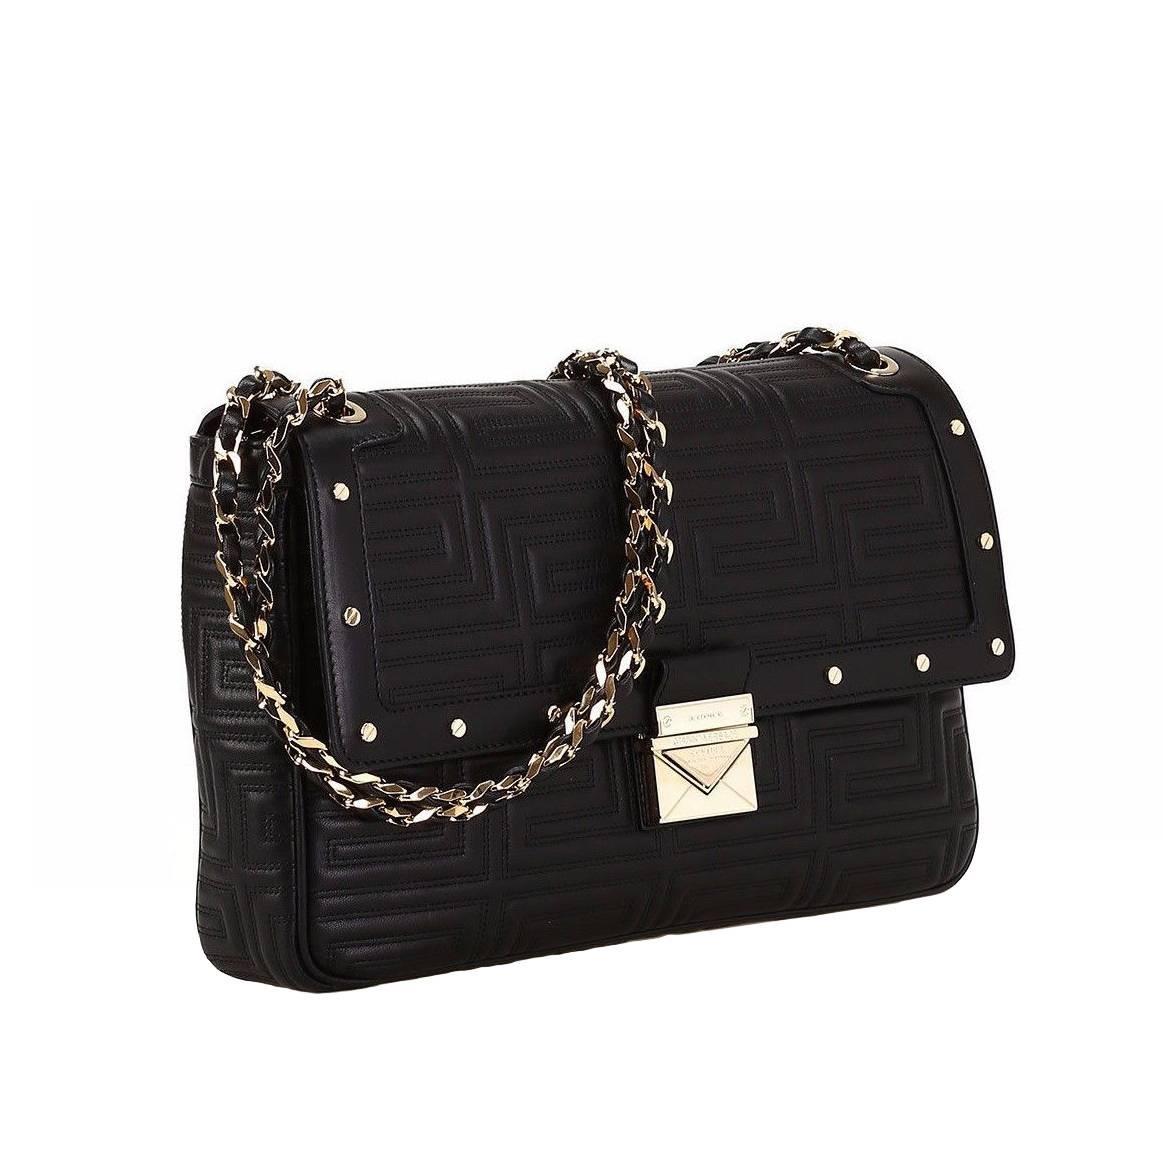 New GIANNI VERSACE COUTURE black quilted leather shoulder bag For Sale ...